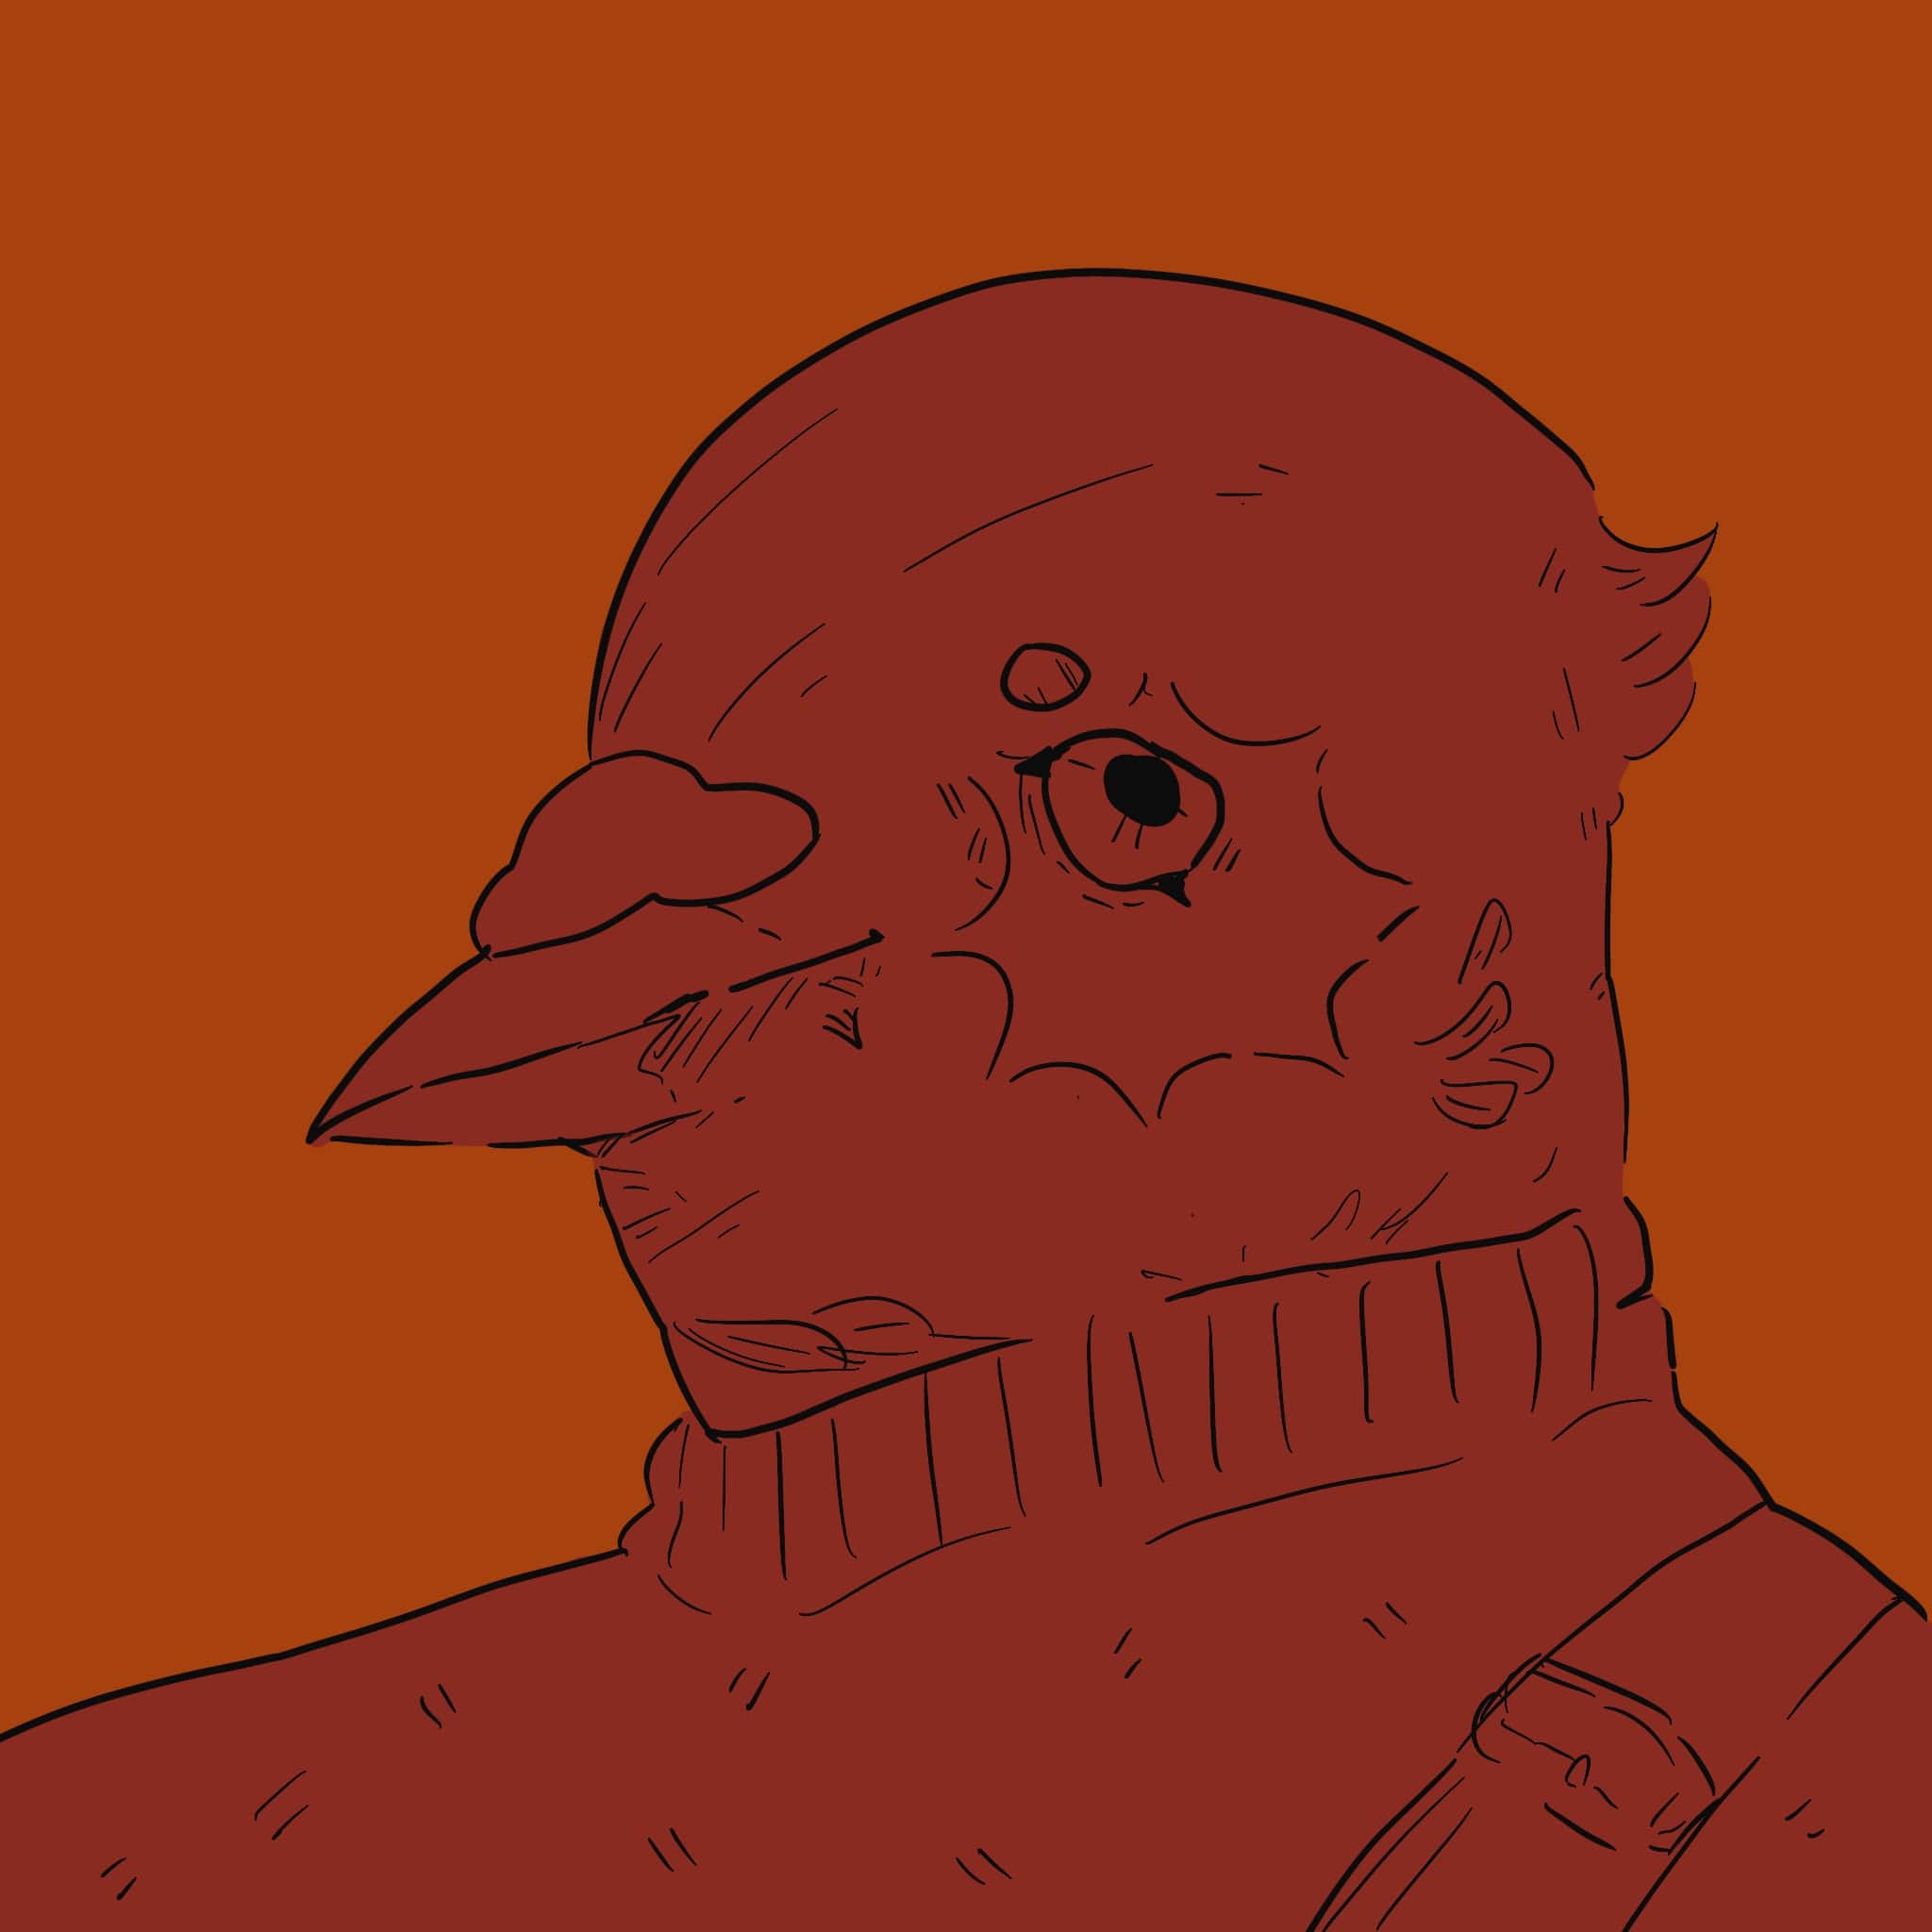 A digital painting of a red bird against an orange background.